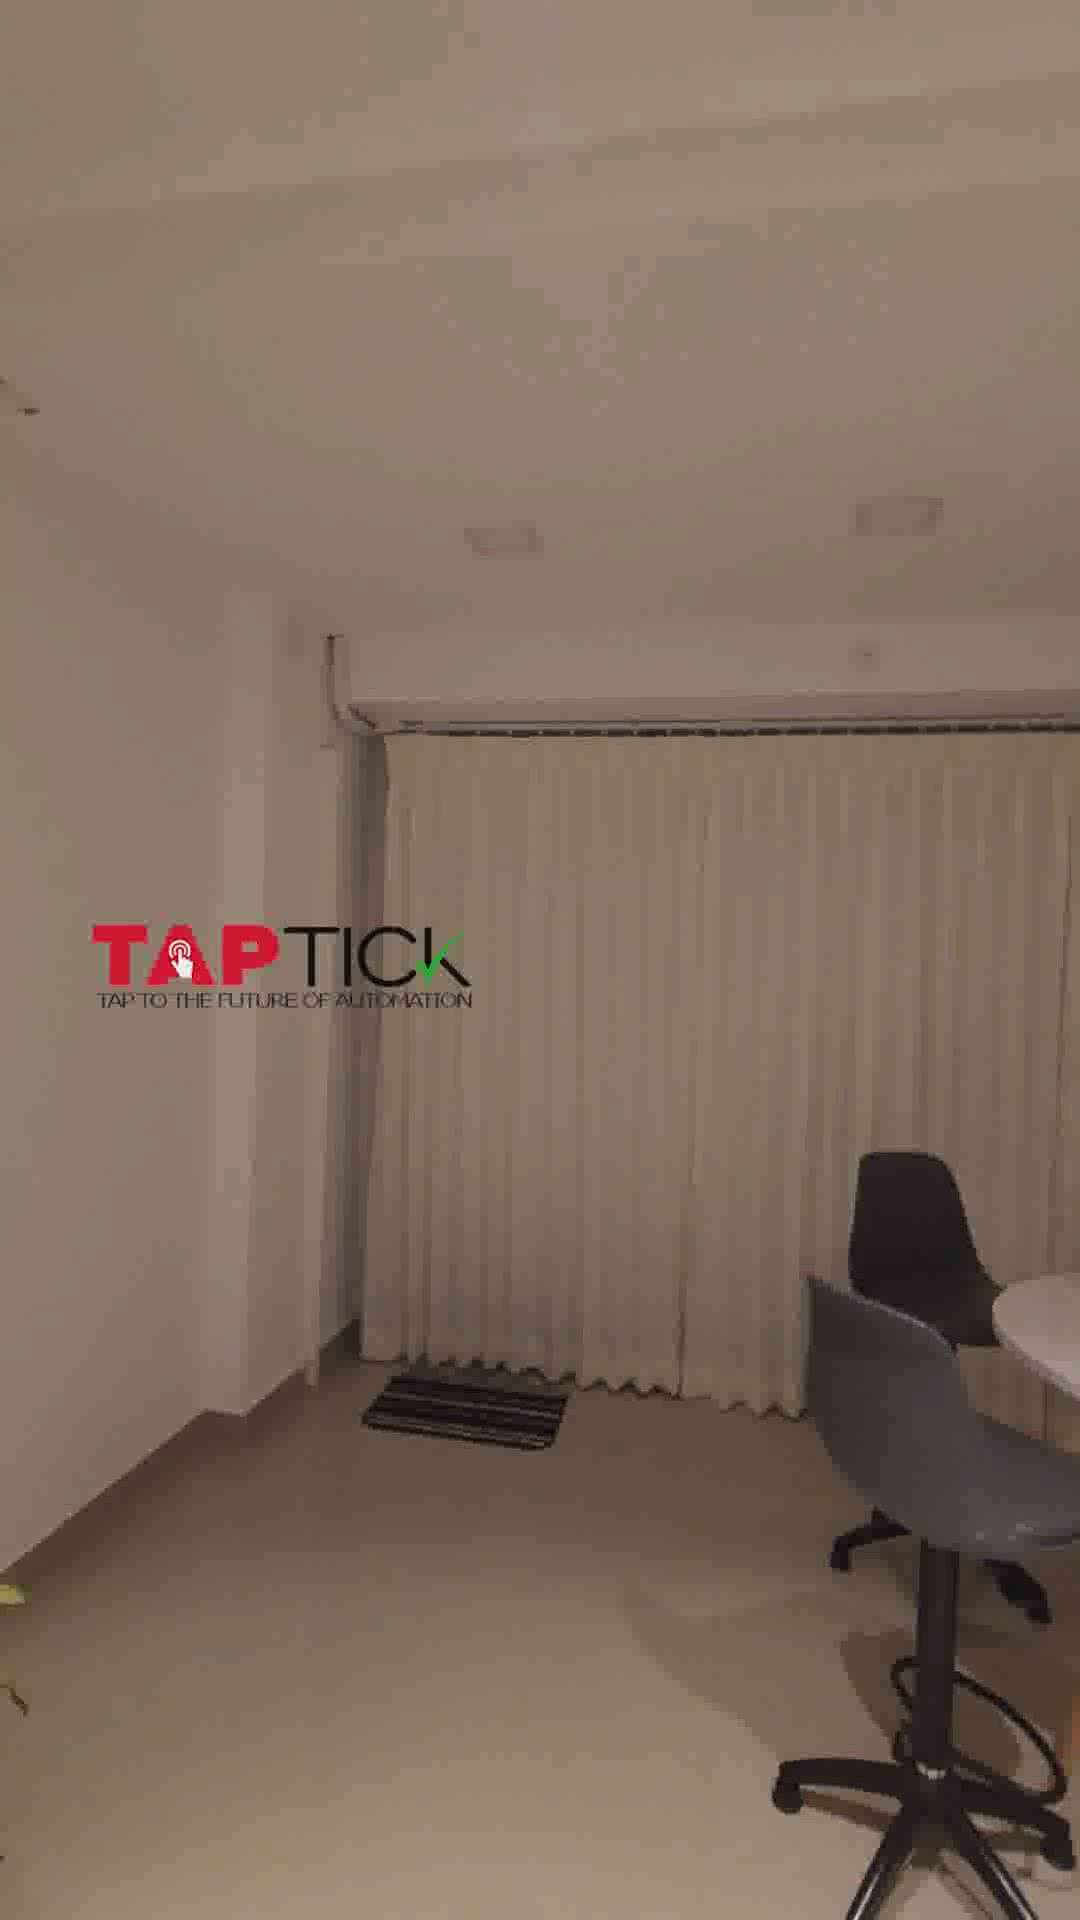 SMART HOME
Tap To The Future Of Automation
We specialise in home and commercial automation system by using novel technologies which helps you protect and manage your home,office or any space virtually from anywhere.

For More Information 

https://tap-tick.com/
Ph
 : +91 9988 4433 02
 : +91 9747 3723 53
 : +91 7306 2446 68 #smarthomomeautomation  #HomeAutomation   #homedesigne  #smarthometechnology  #smarthomedesign #smarthomesolutions  #smarthomesolutions